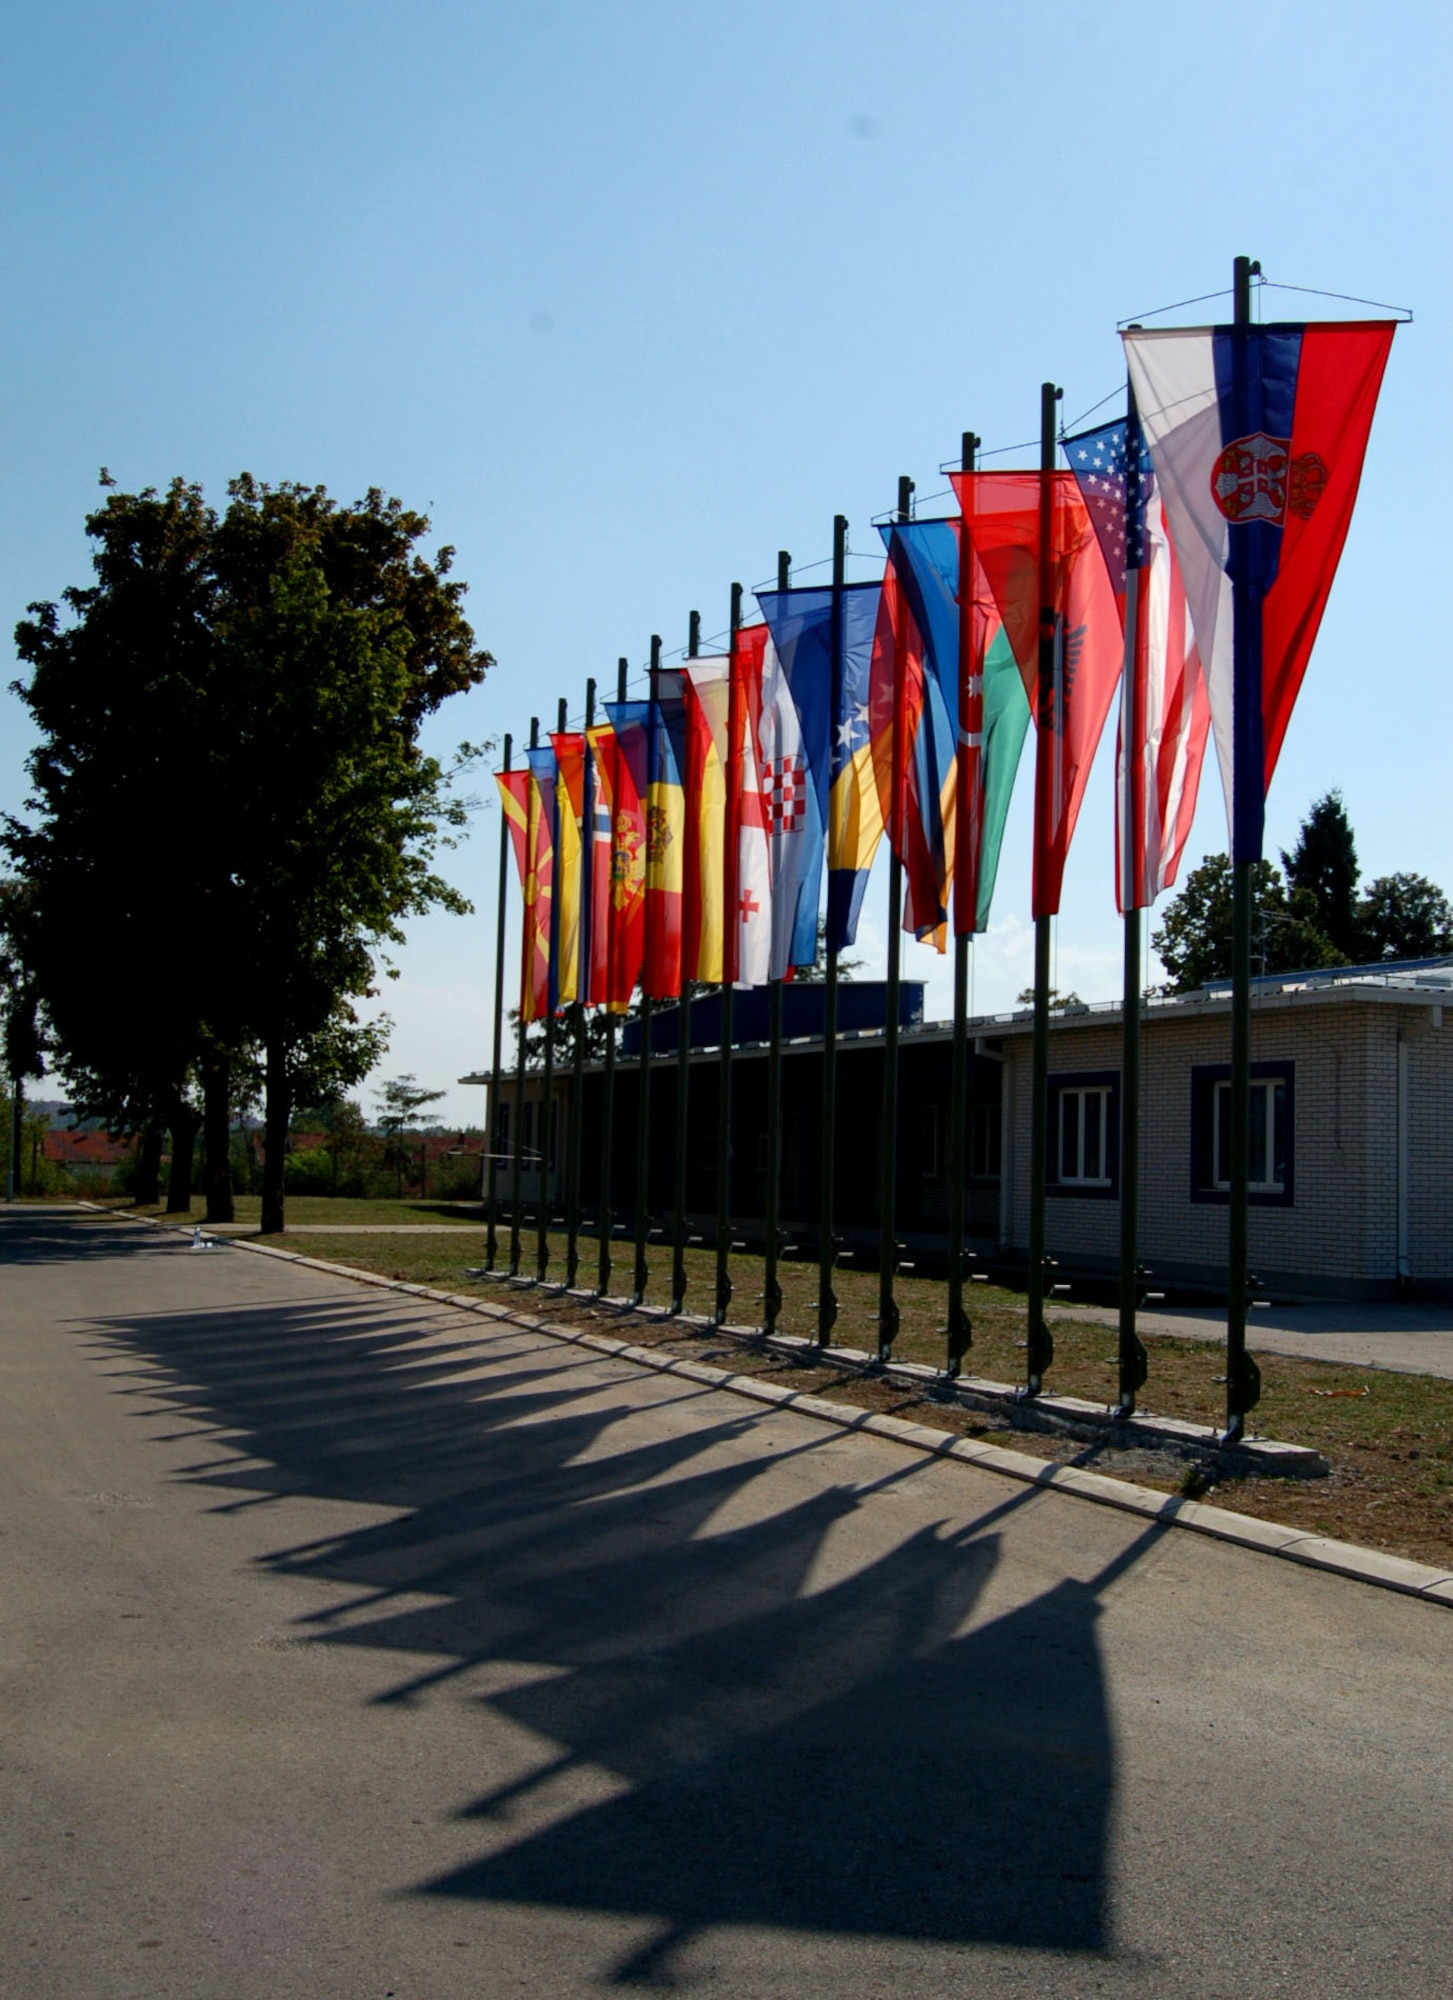 NIS, Serbia – Flags of participating countries in the military medical training exercise in Central and Europe, better known as MEDCEUR 2009, in Nis, Serbia, are flown outside the exercise headquarters in representation of the 15 countries participating in MEDCEUR 2009. More than 600 participants flocked to Nis to partake in various medical classes and simulations designed to increase overall knowledge of emergency medical response. (U.S. Air Force photo/Senior Airman Kali L. Gradishar)